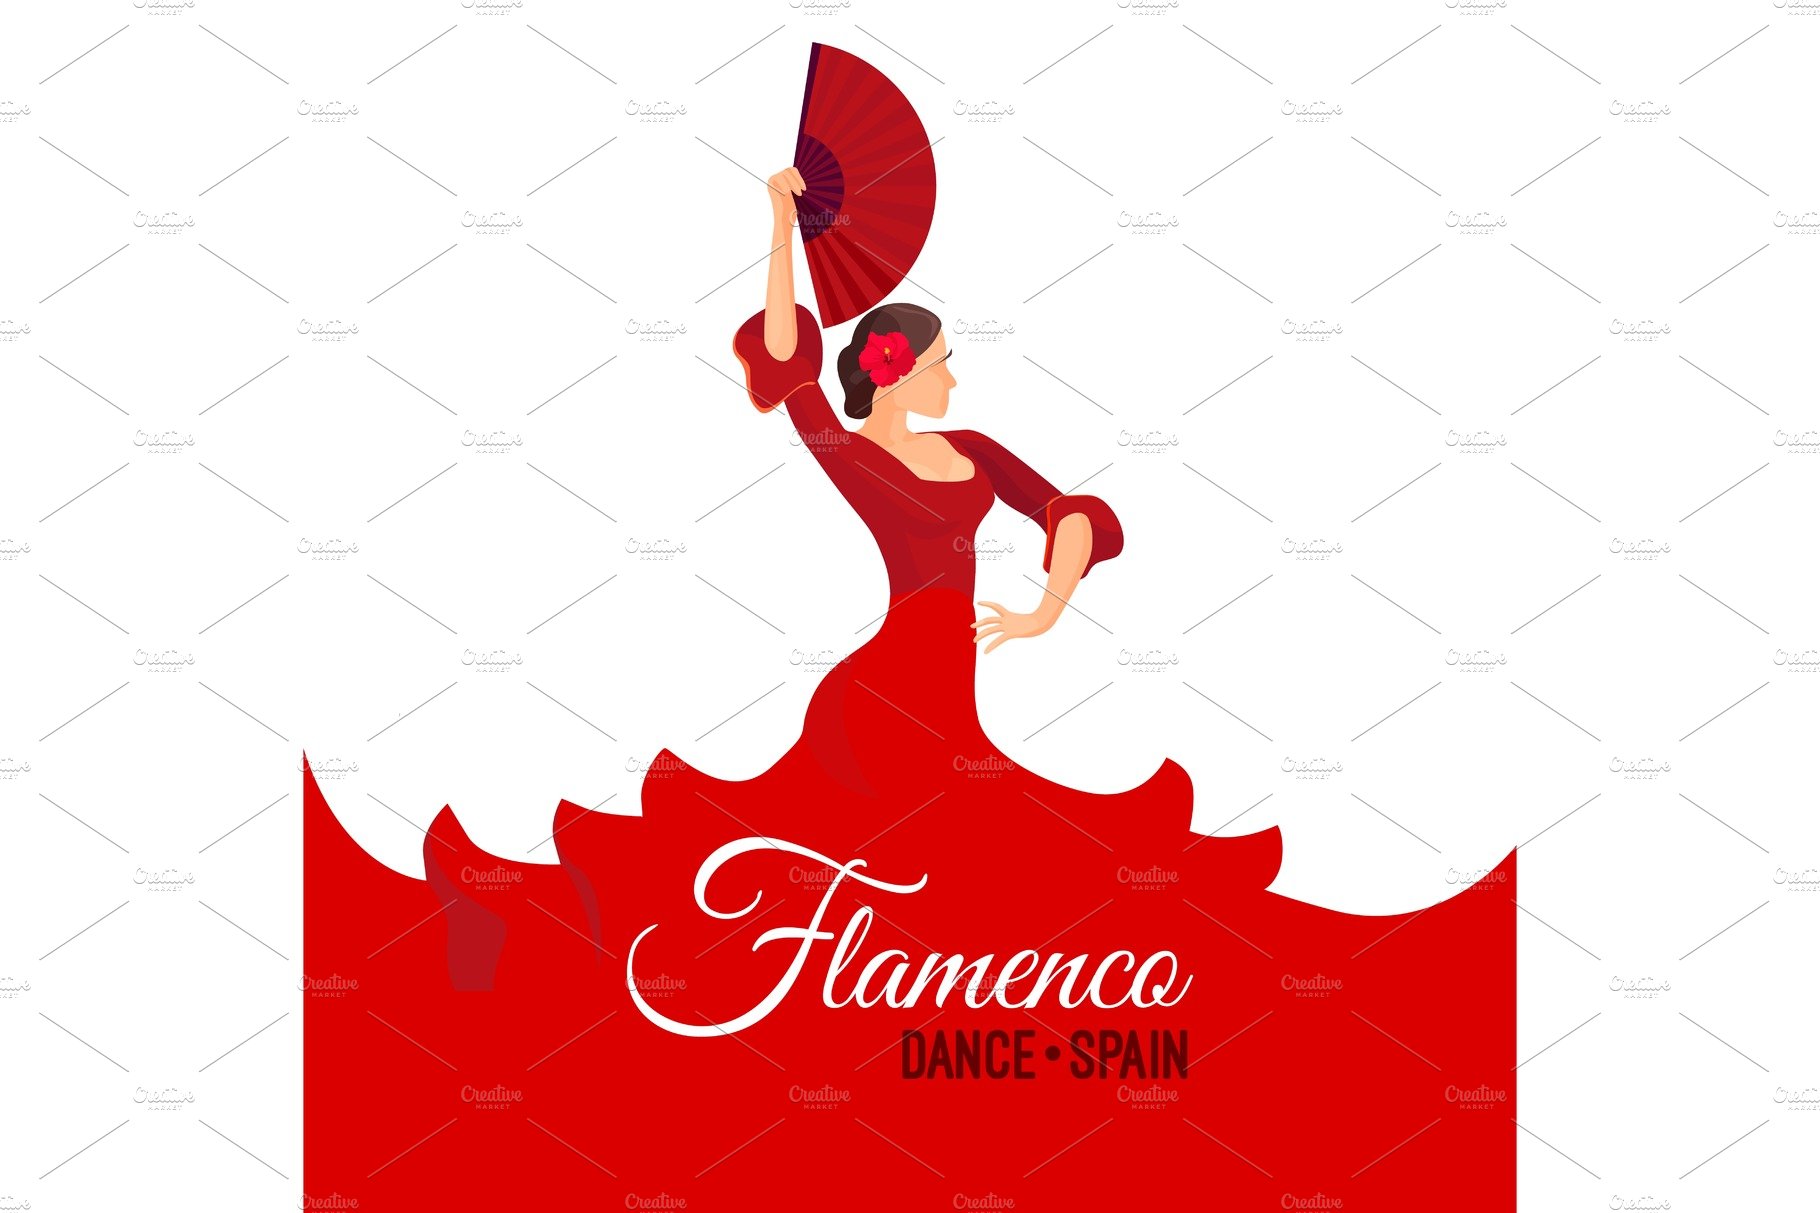 Flamenco dance Spain poster with cover image.